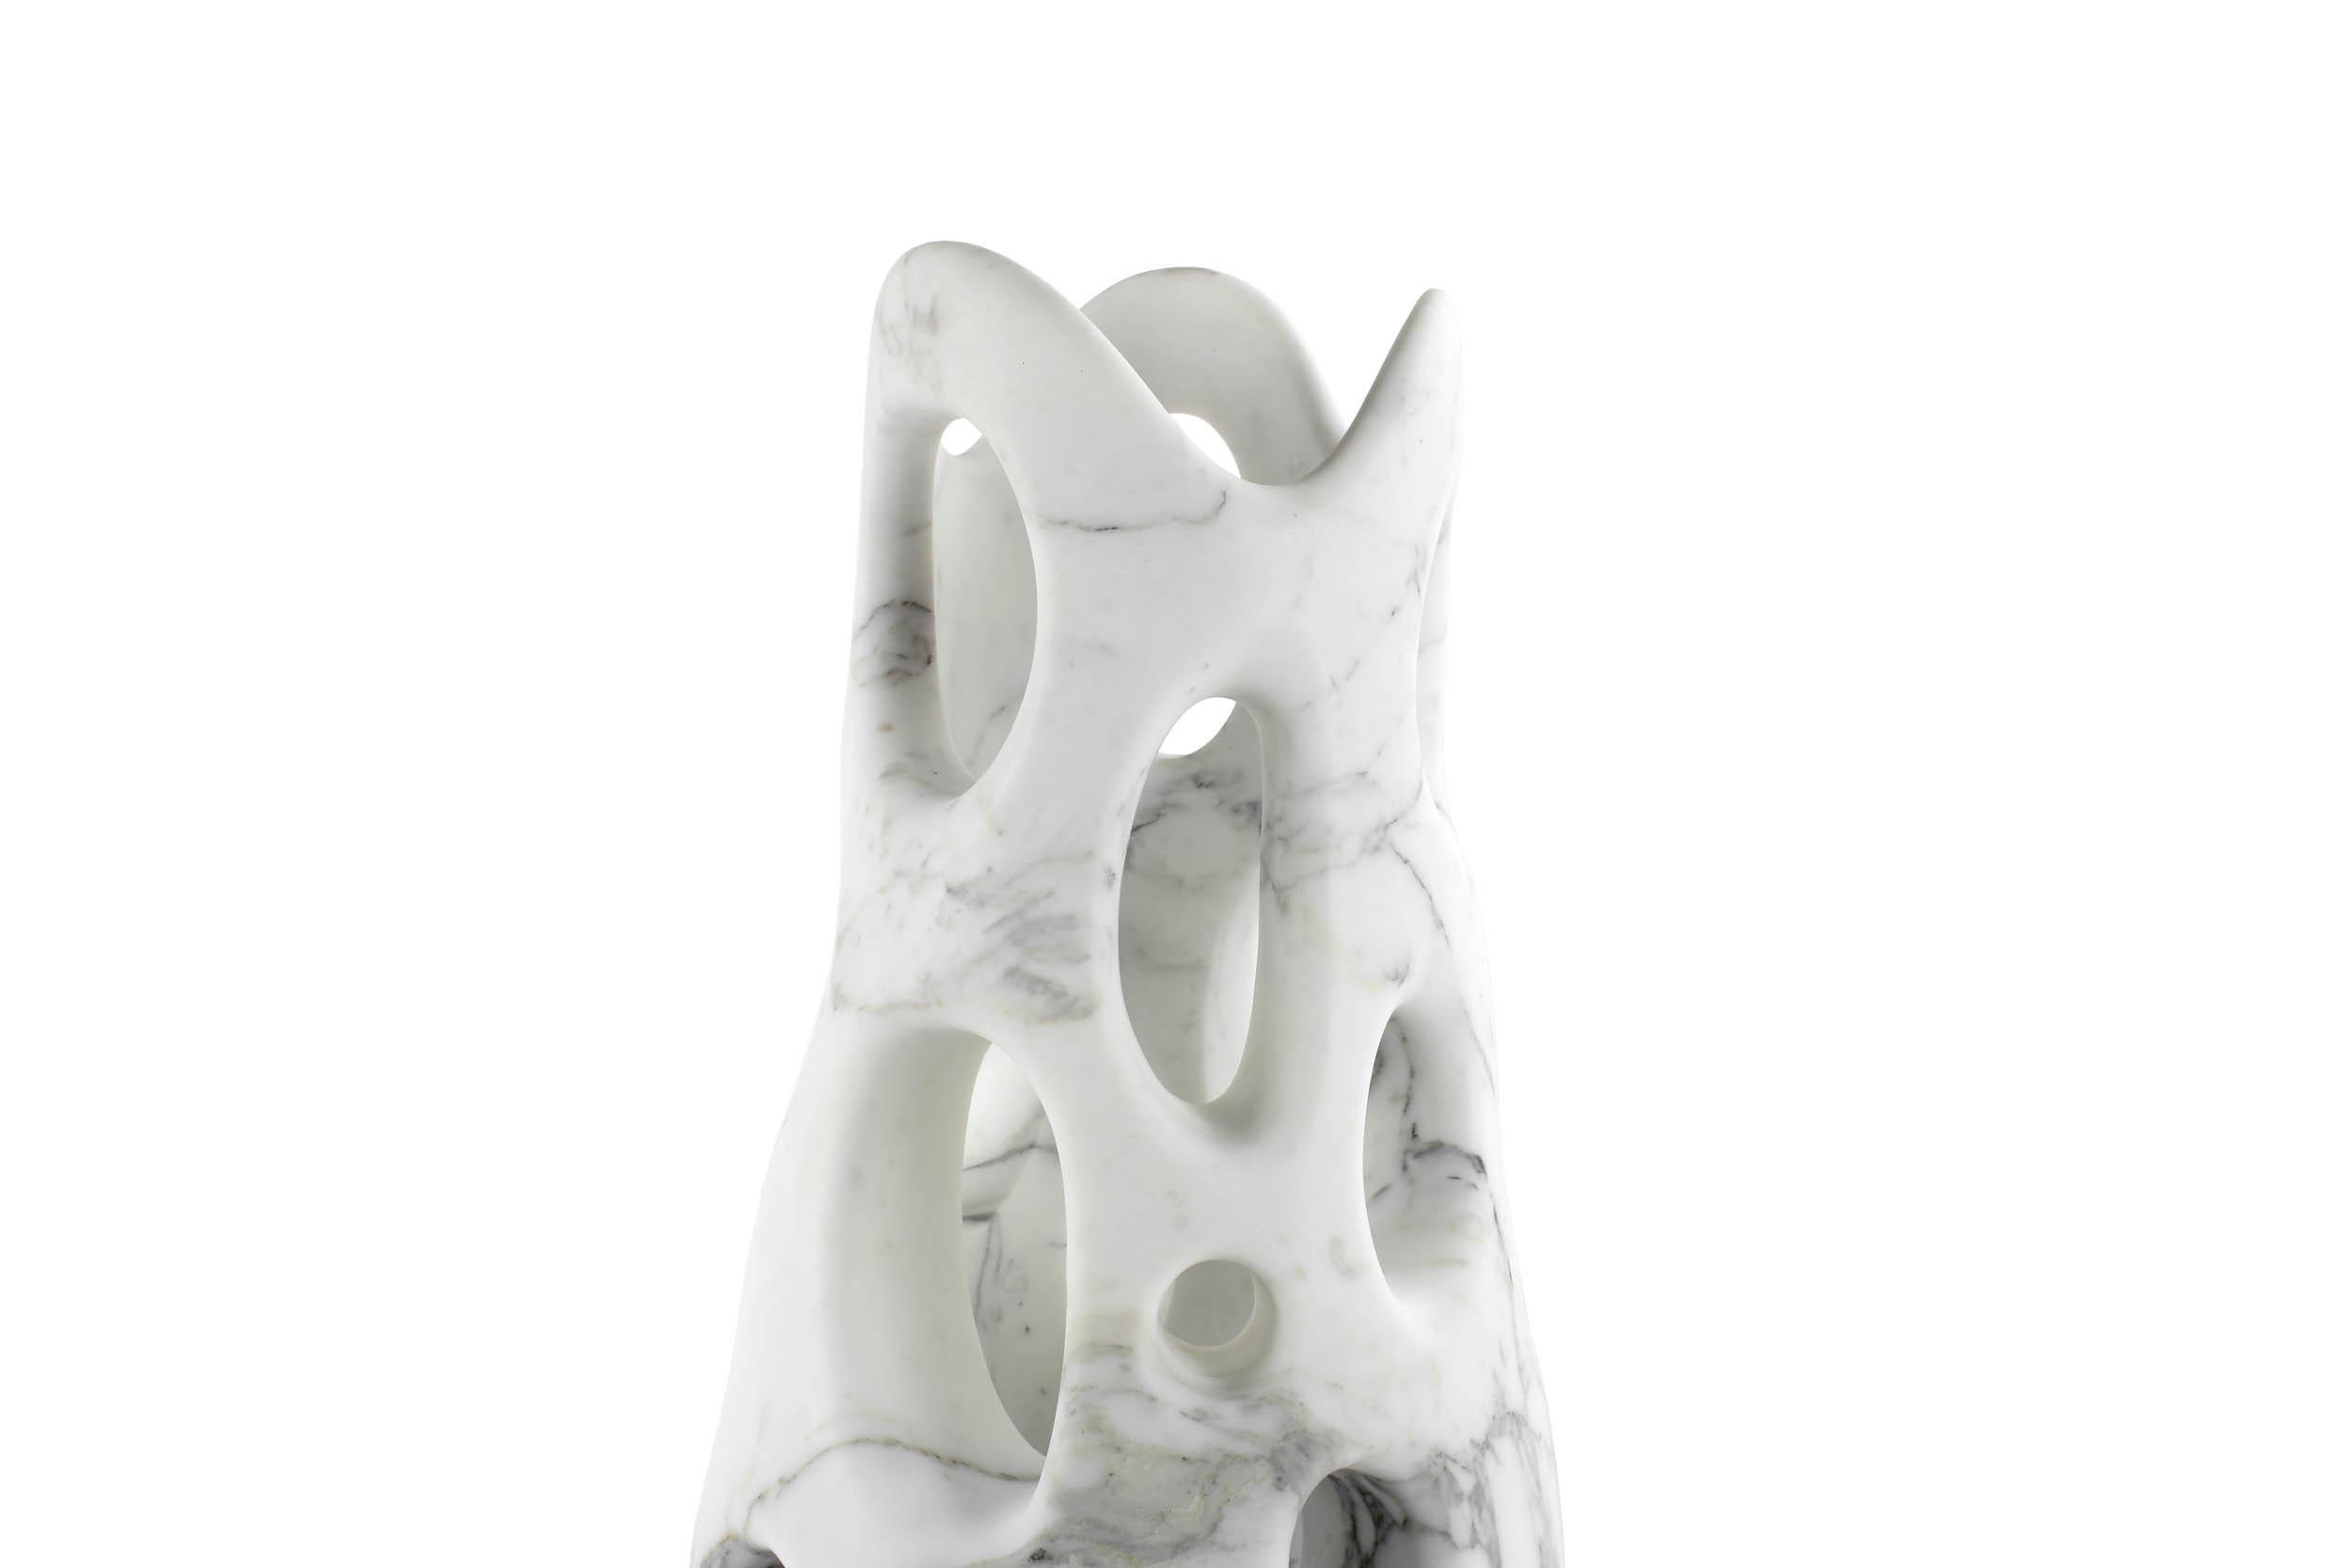 Important sculptural vase carved by hand from a solid block of Arabescato marble. 

Vase dimension: D 30 x H 67 cm. Available in different marbles. 

Limited edition of 35.

Each vase is hand signed and numbered by the artists (engraved), 100%